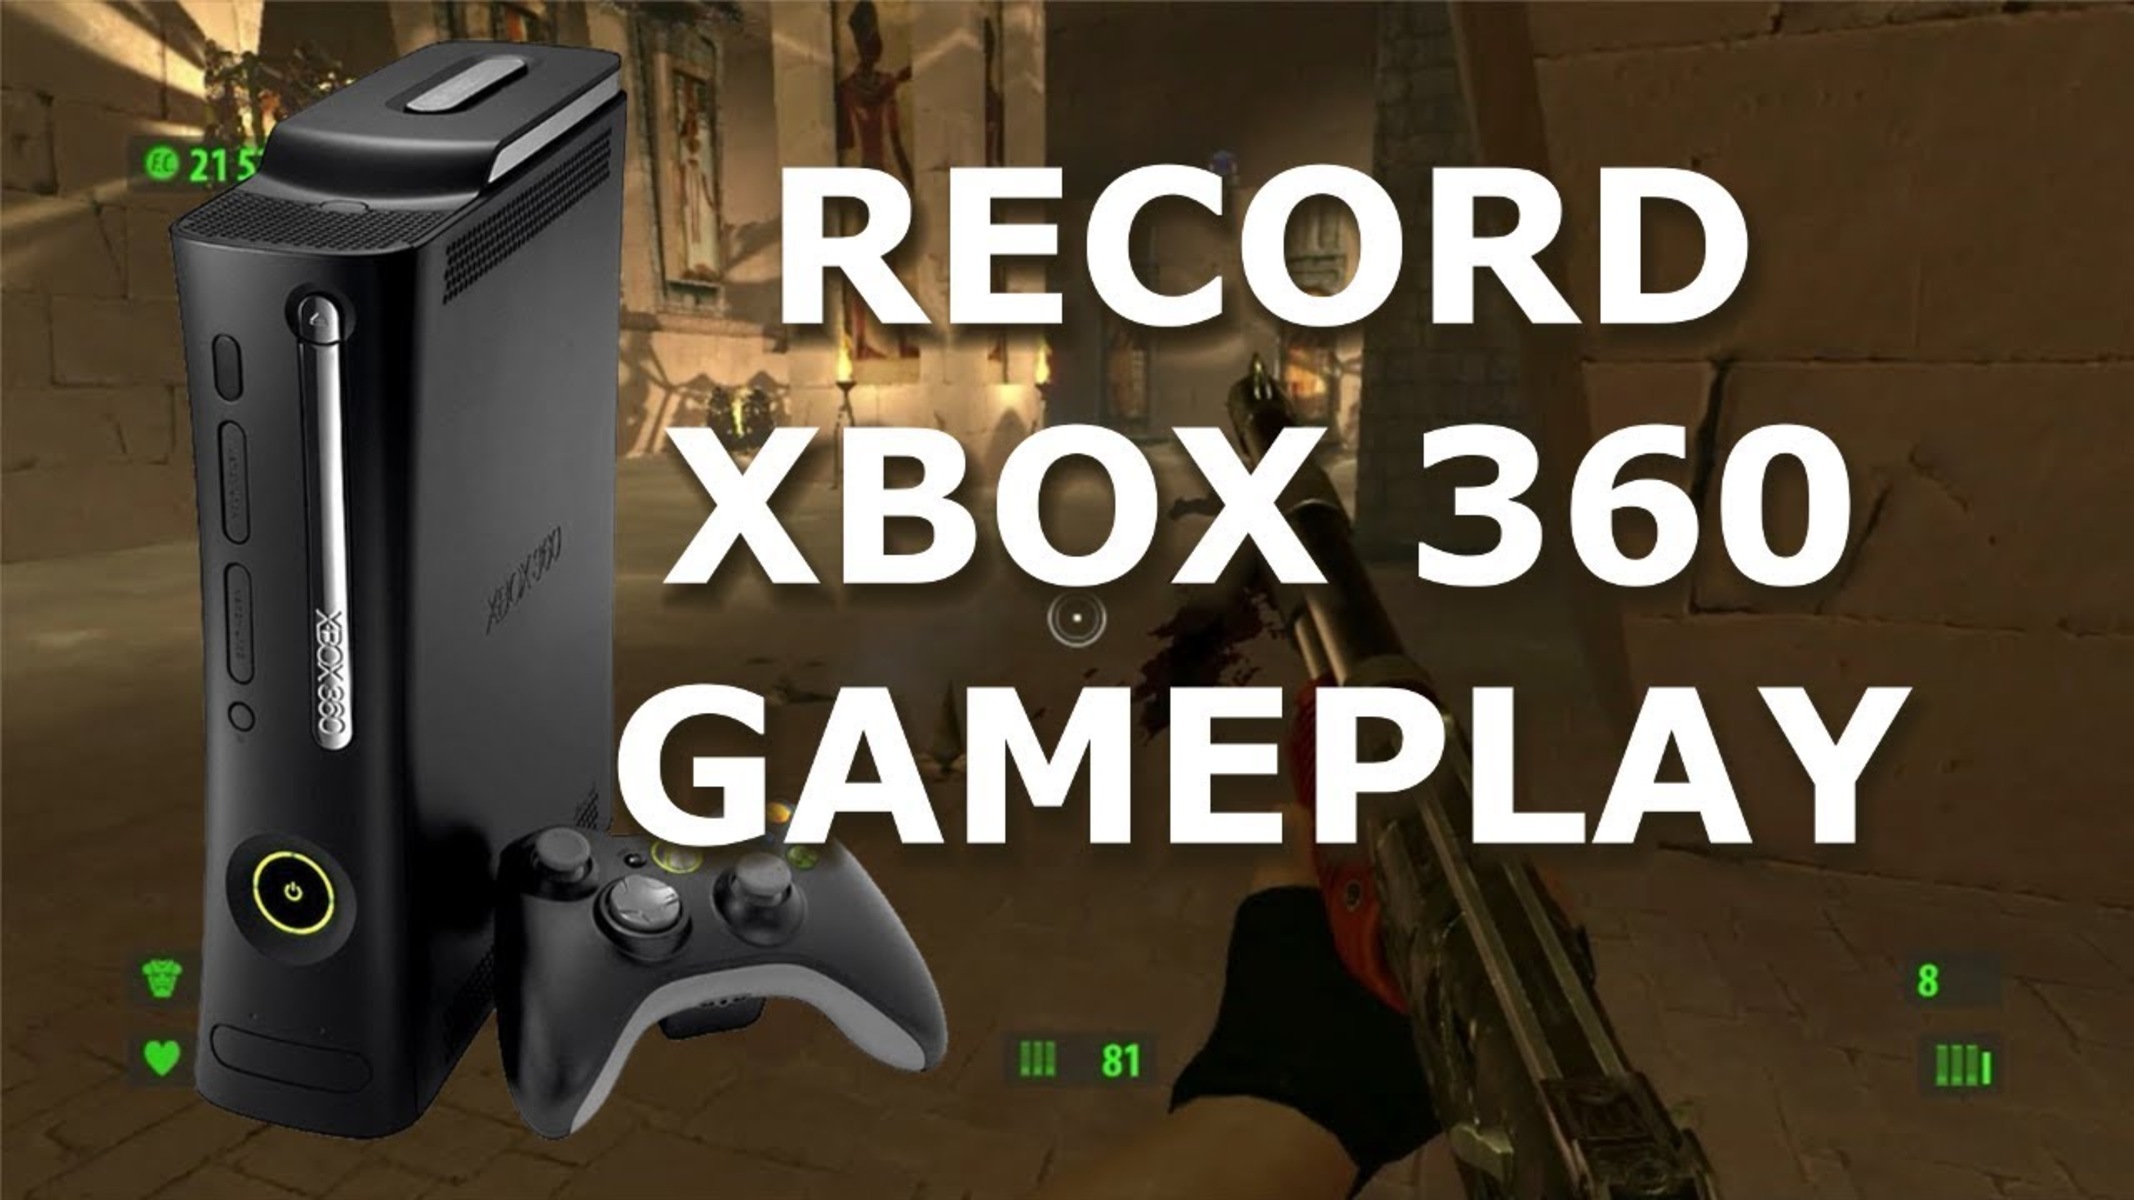 How To Record Xbox 360 Without A Capture Card